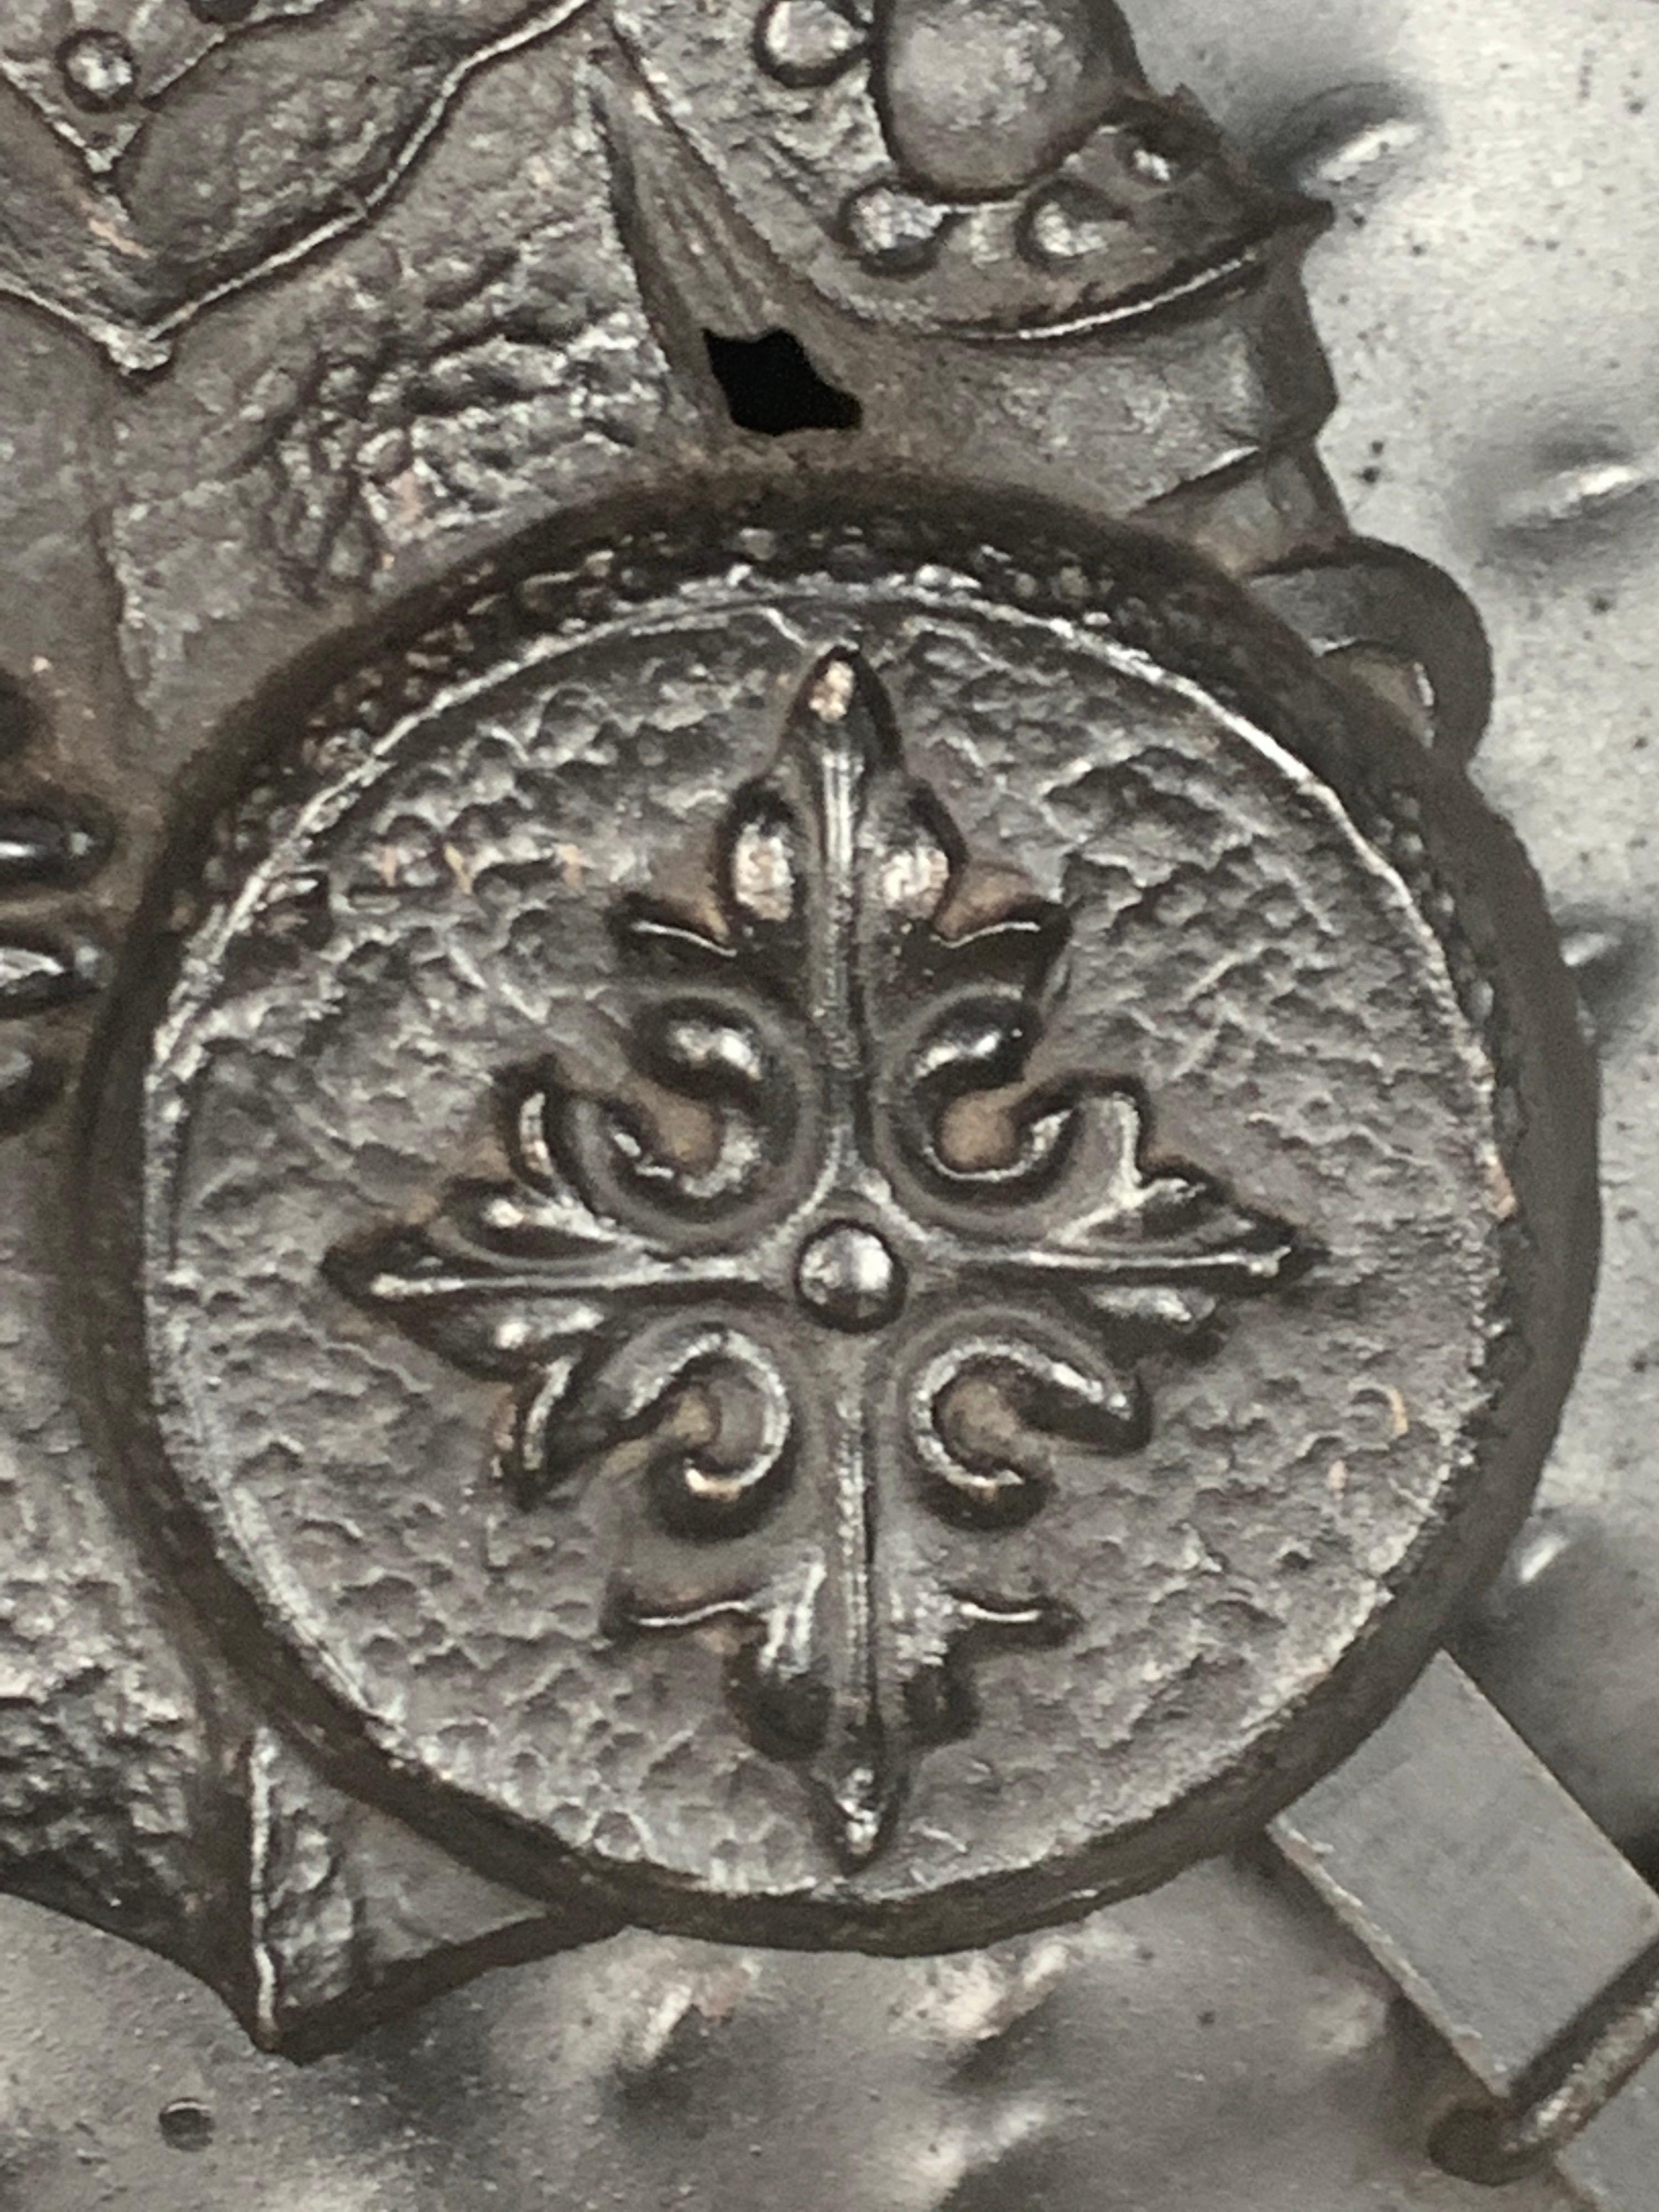 Unknown Iron Spanish Shield with Crossed Swords, circa 1900s